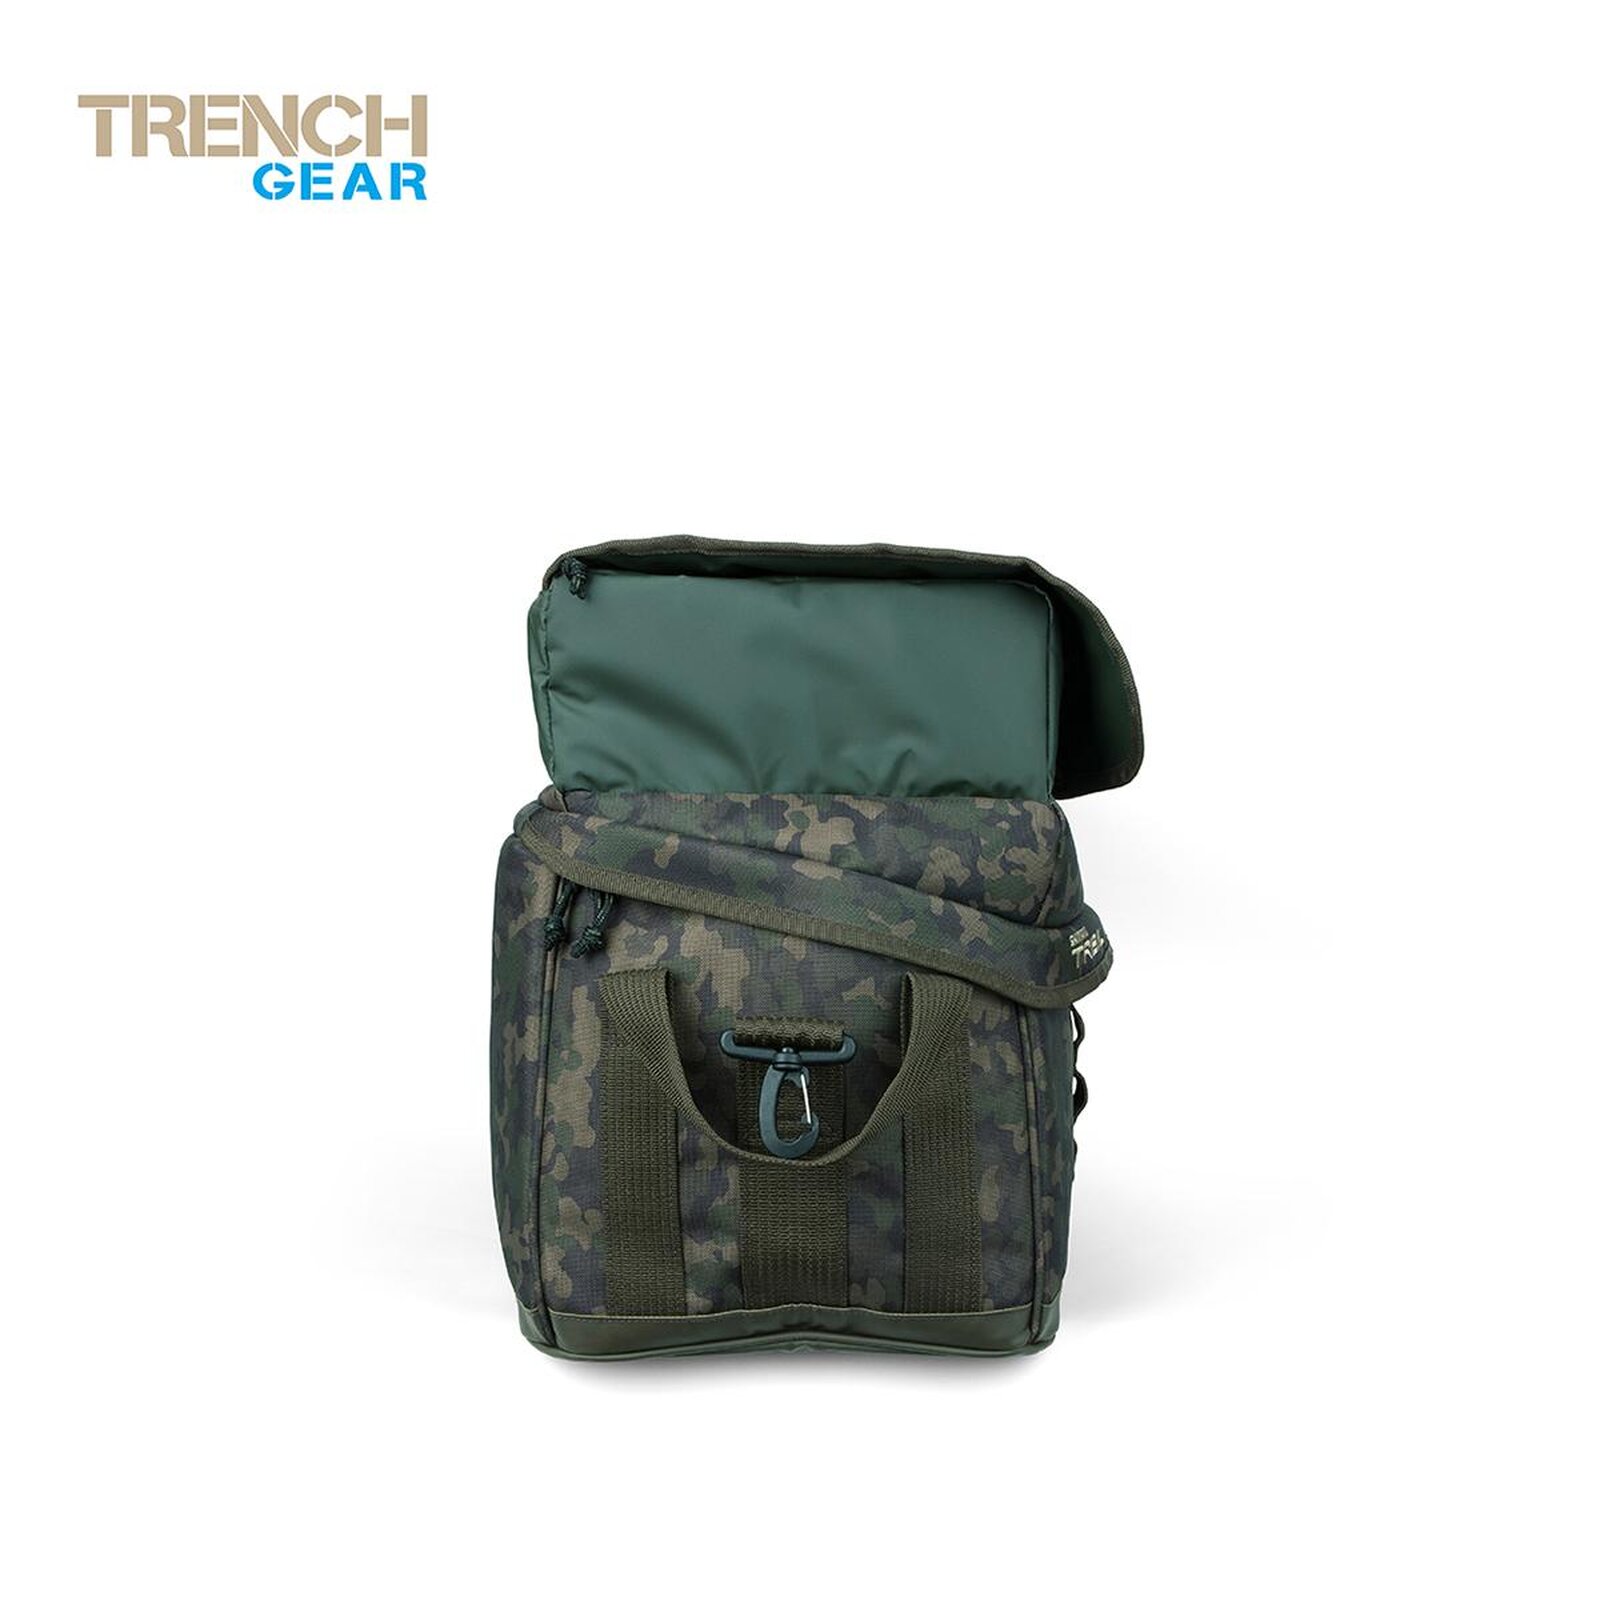 Shimano Tribal Trench Large Carryall Incl. Aero Qvr Strap Advanced